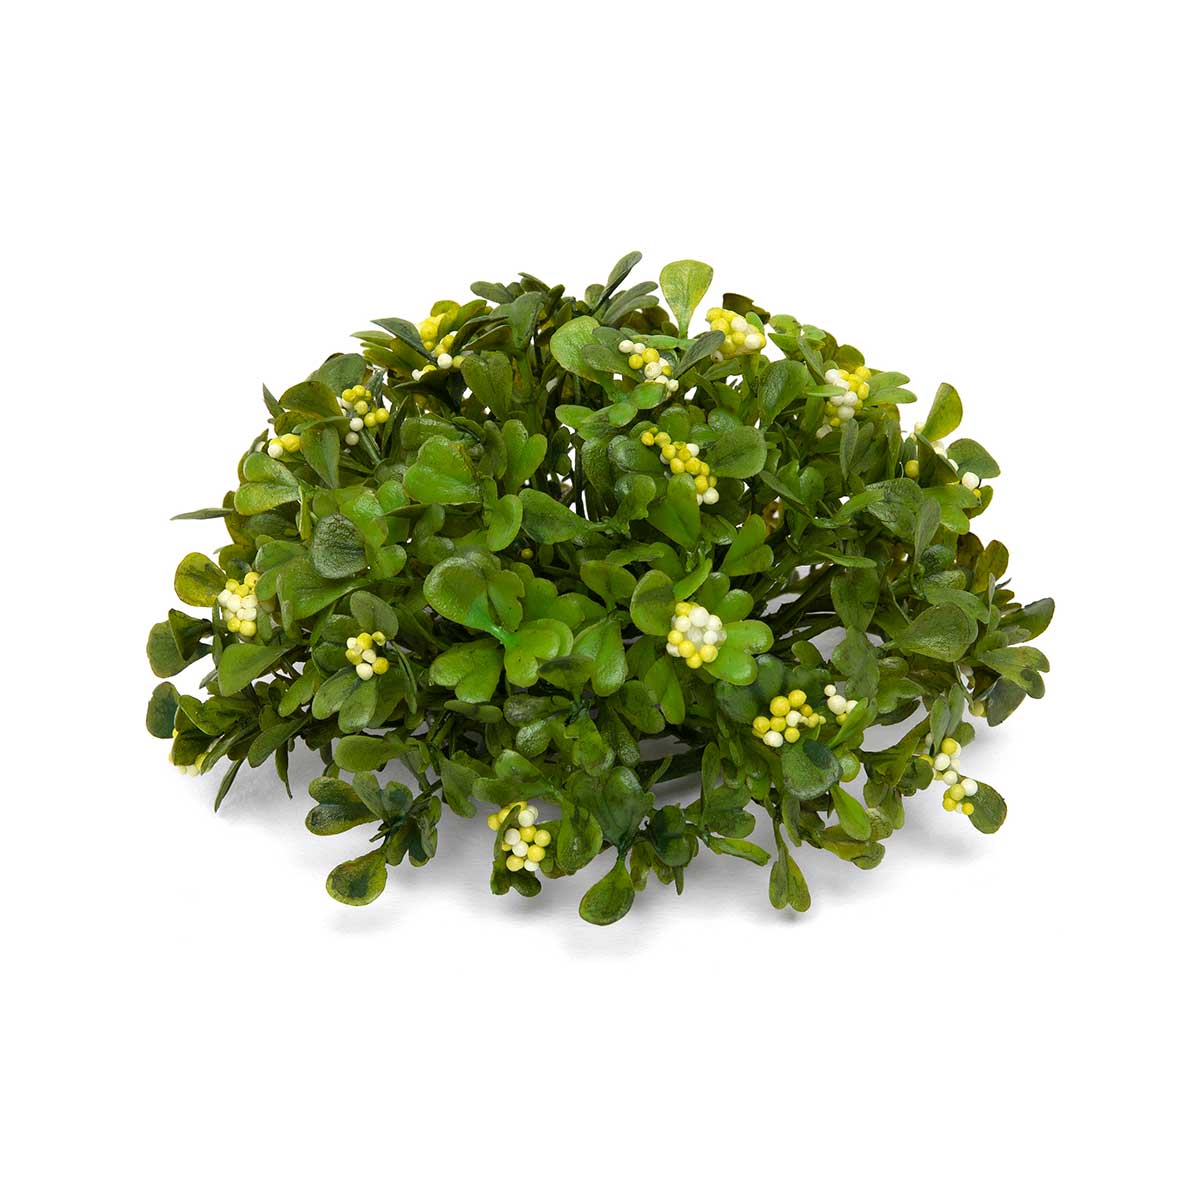 DOME BOXWOOD WITH BERRIES SMALL 5IN X 2.5IN GREEN/WHITE - Click Image to Close